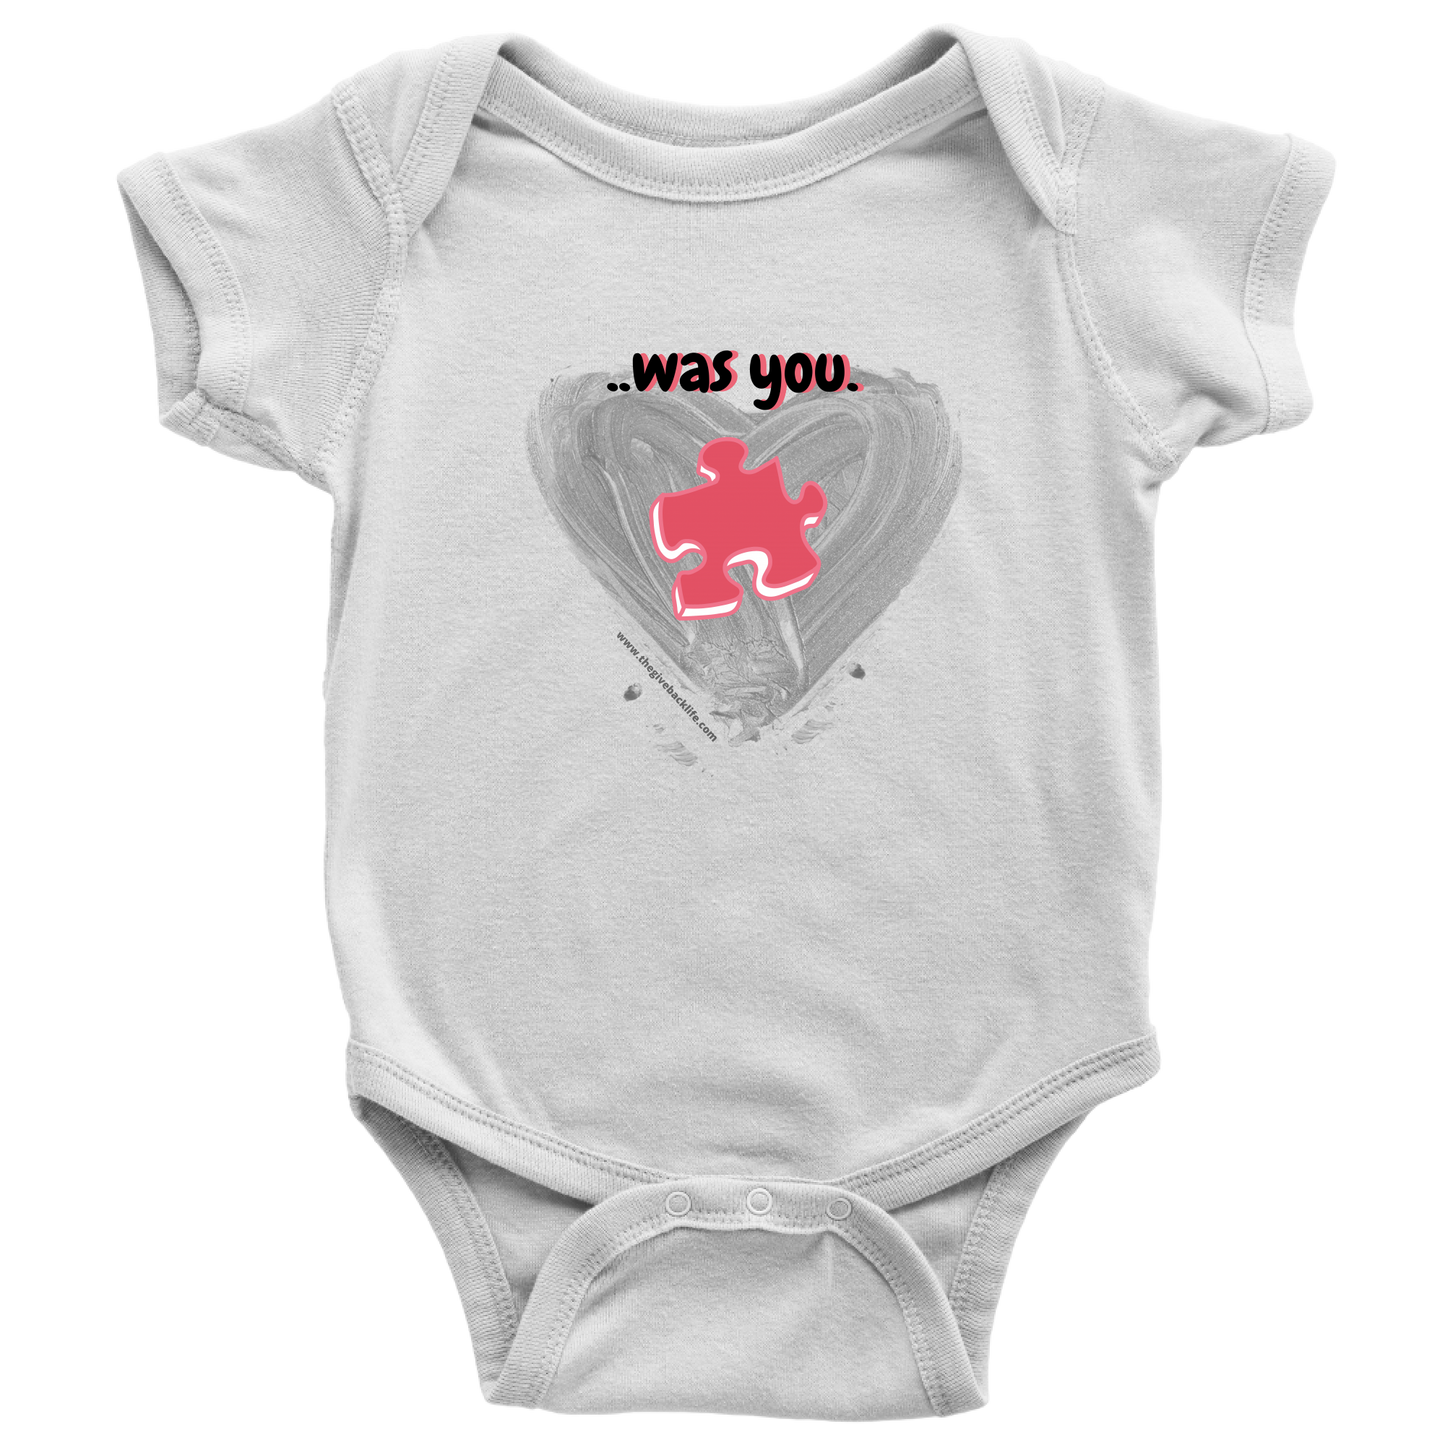 All My Heart Needed Was YOU! Mom and Baby Set